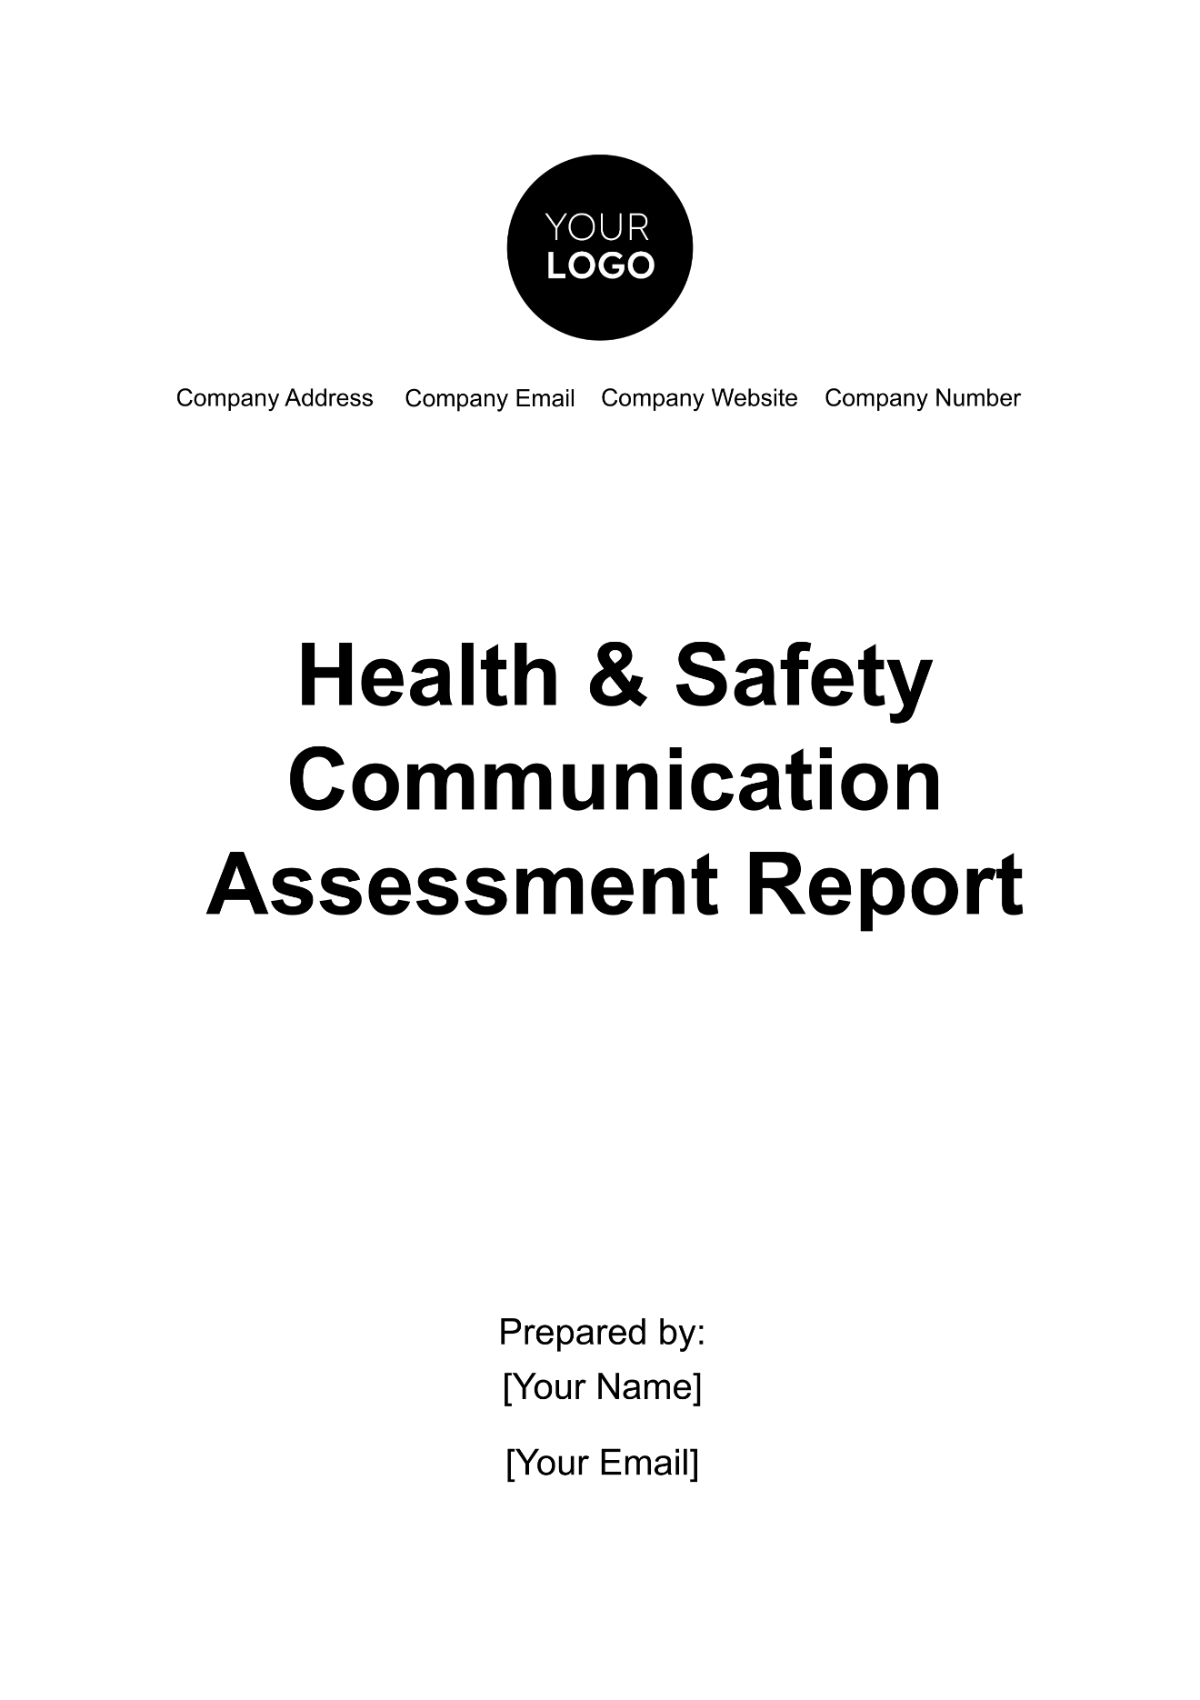 Free Health & Safety Communication Assessment Report Template